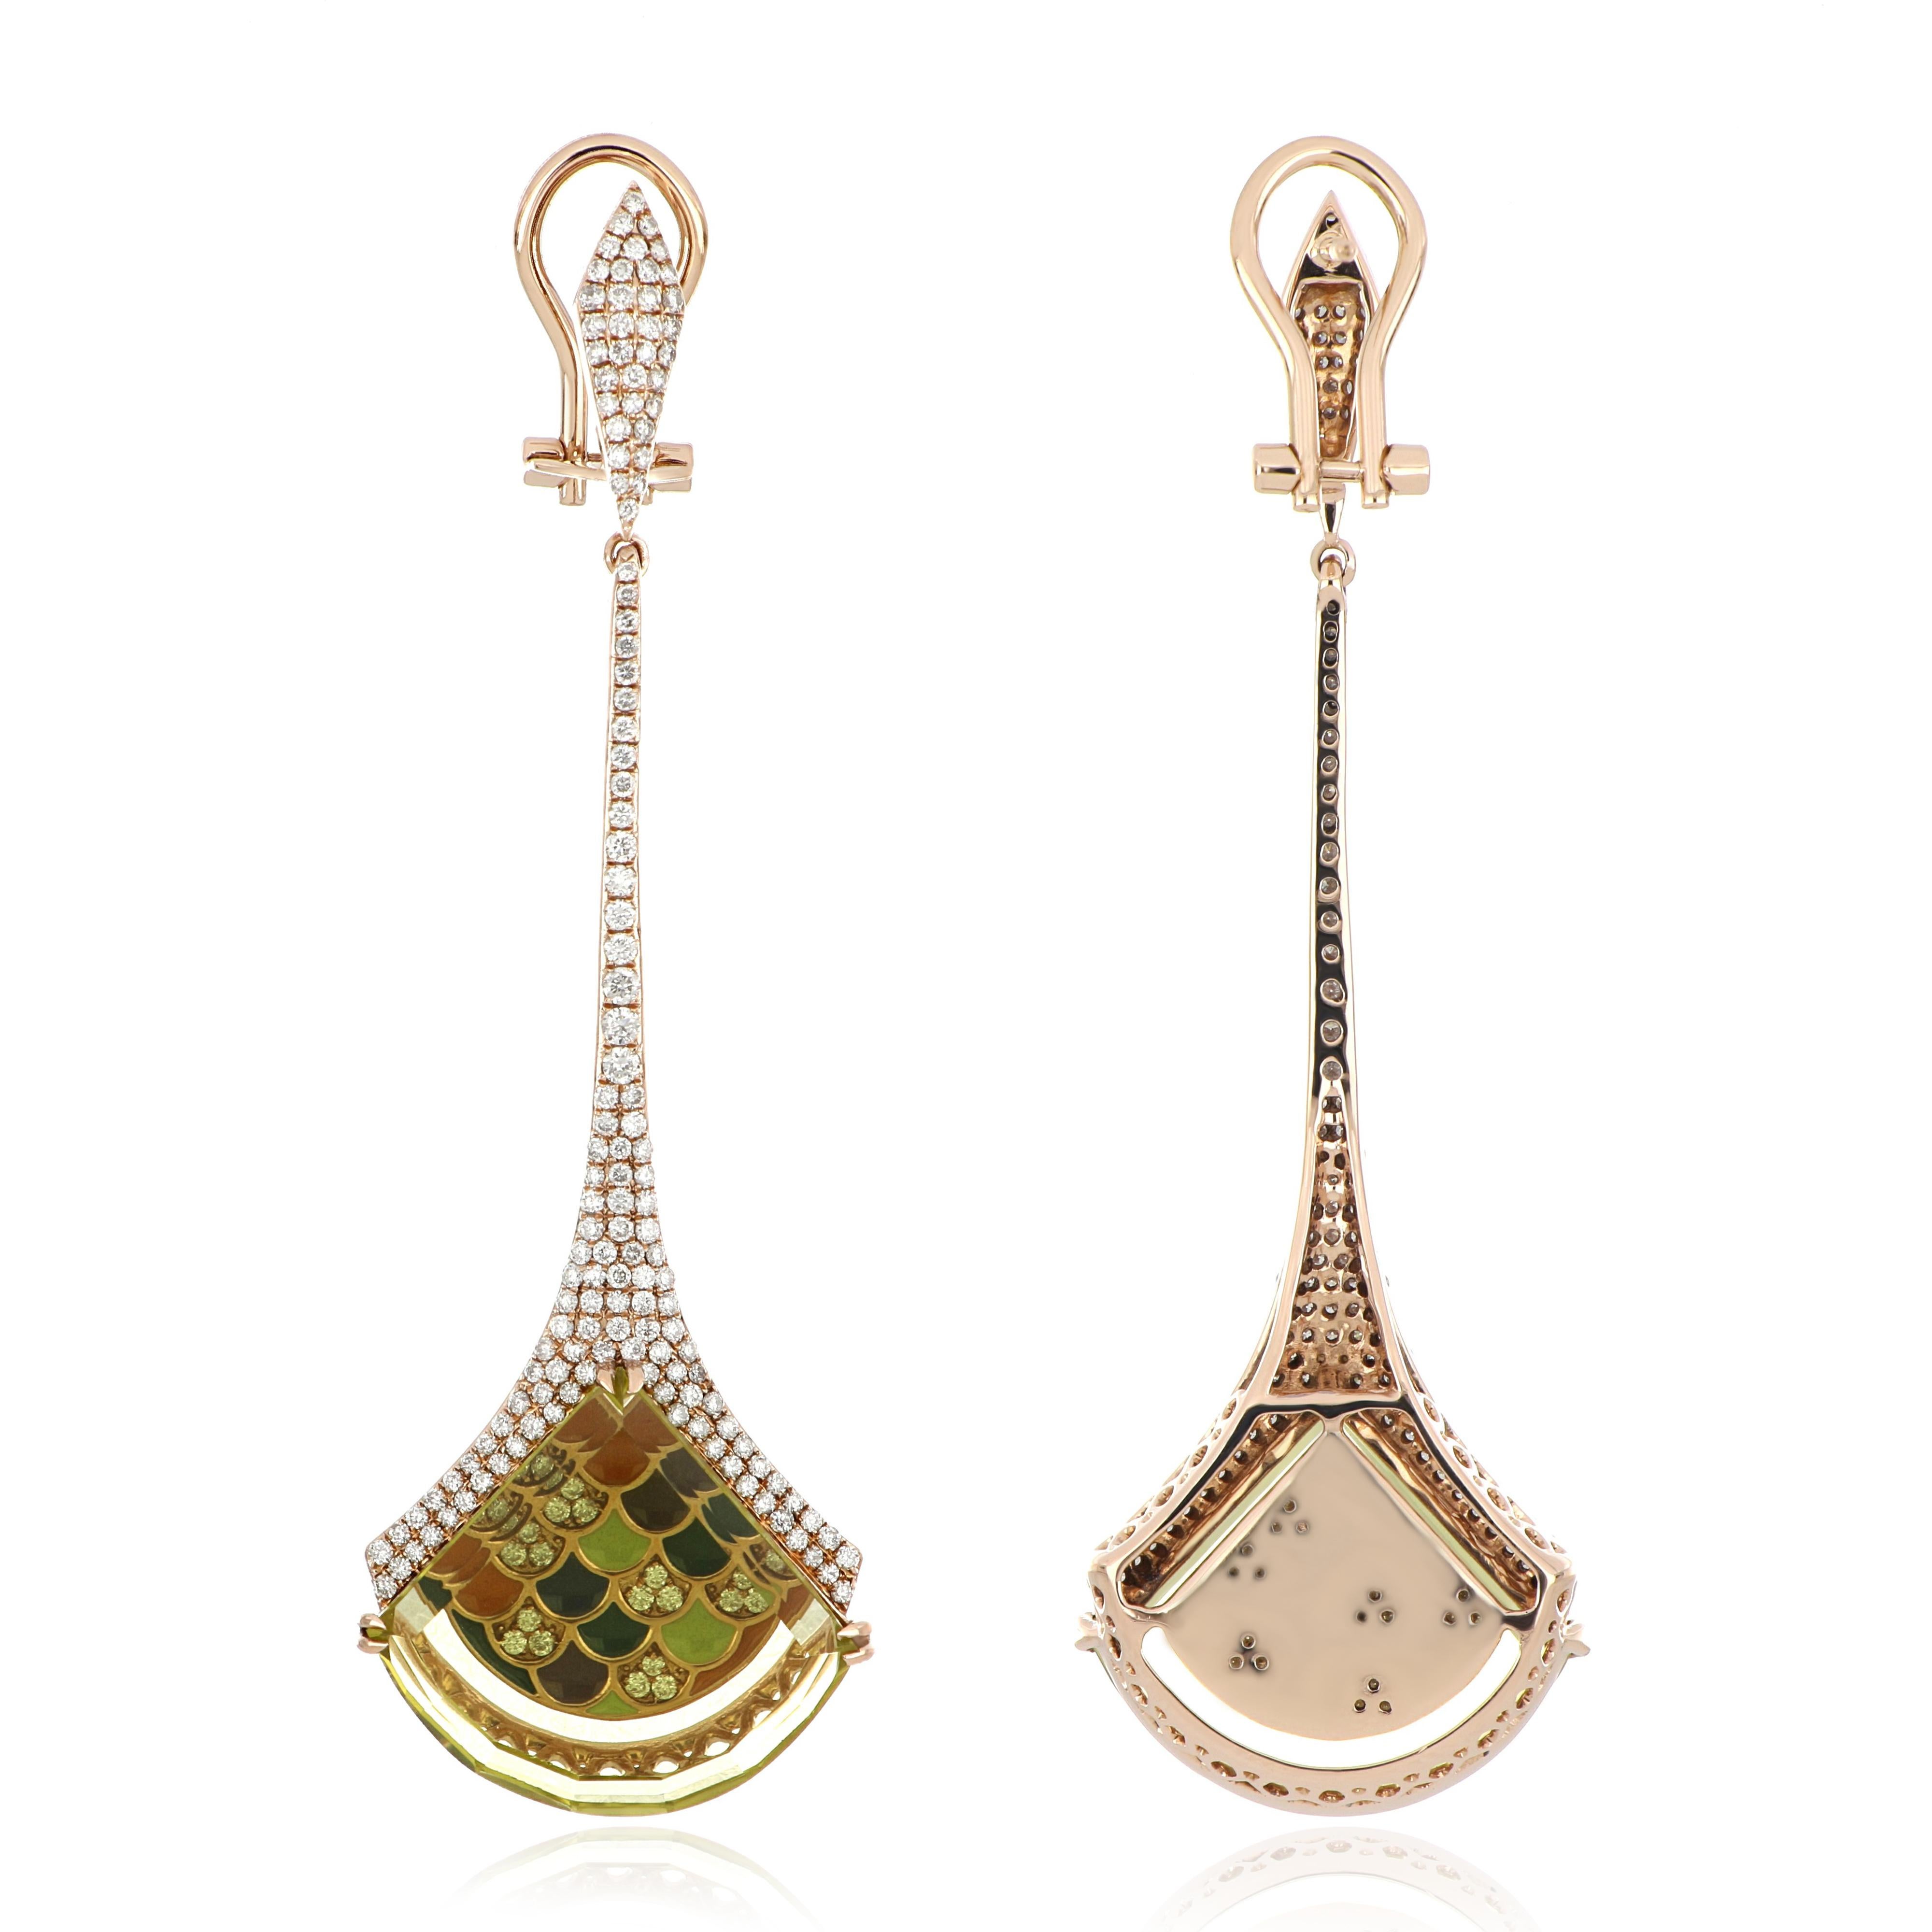 14 Karat Yellow Gold Earrings studded with Fancy Cut  20.10 Cts (total wt) Lemon Quartz,  with unique under stone setting of 1.48 Ct Diamond hand crafted in 14 Karat Yellow Gold.

Stone Details:
Lemon Quartz: 18.9 x 17.2 mm

Stone Weights:
Crystal